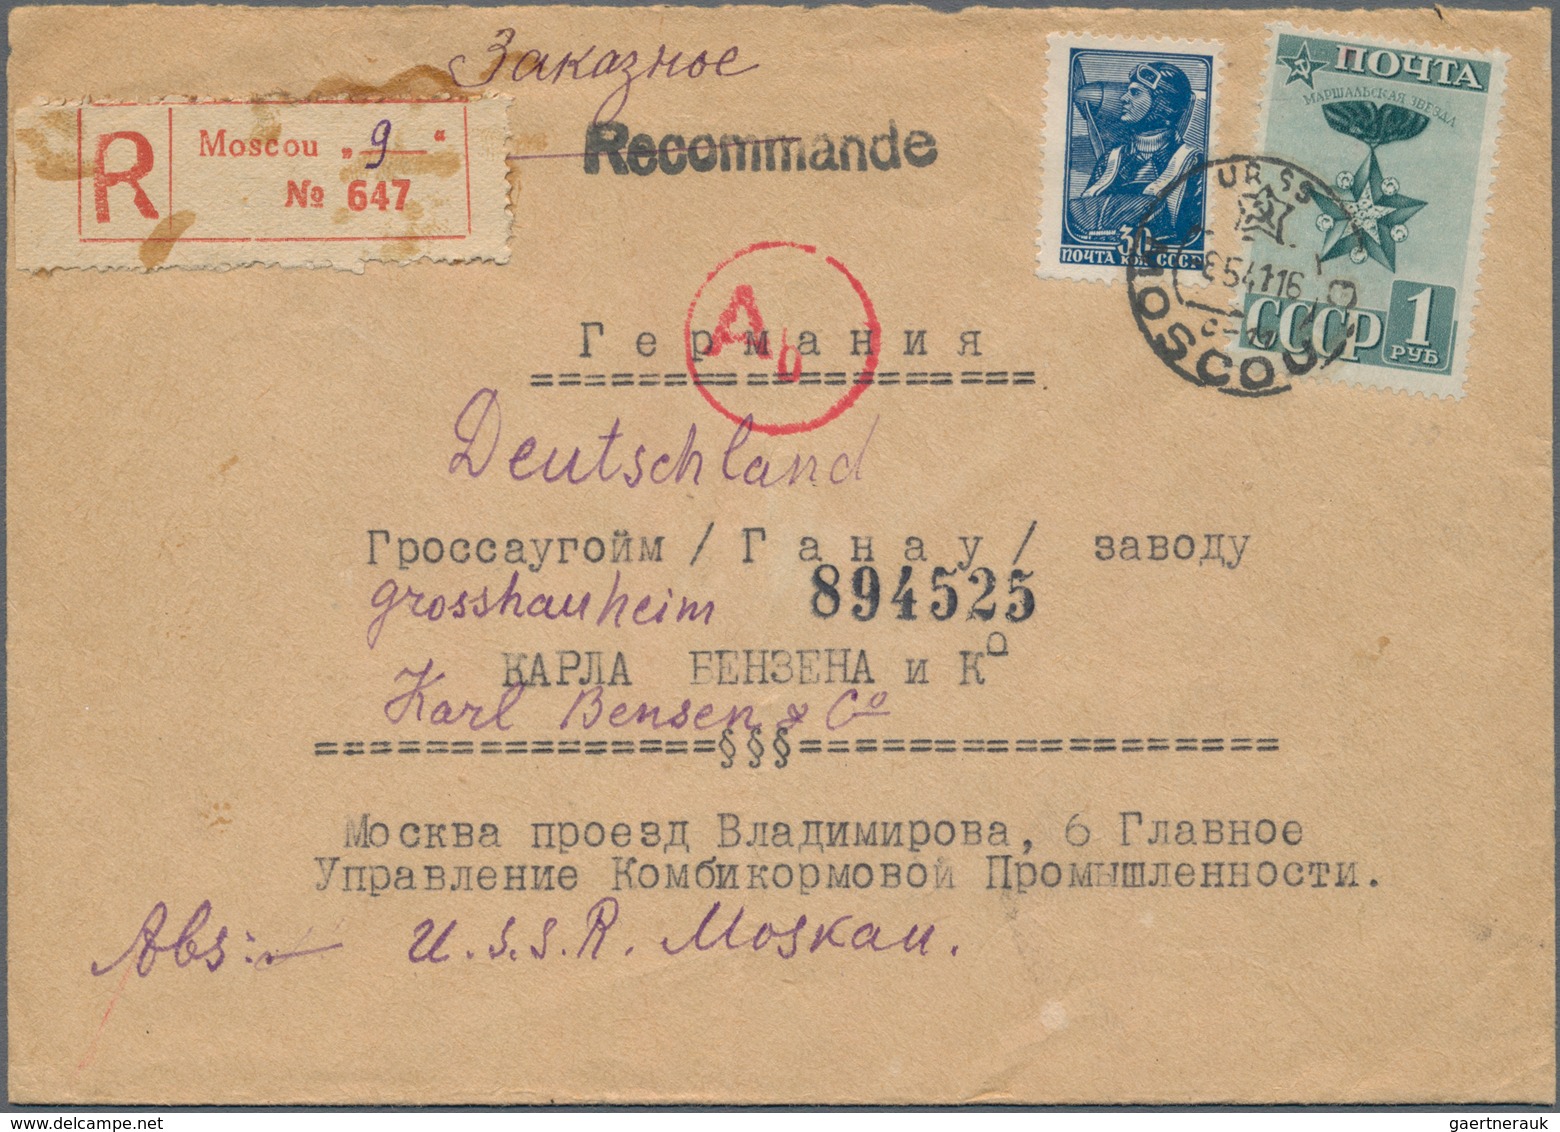 Sowjetunion: 1903/1961, assortment of apprx. 95 covers/cards, showing a nice range of interesting fr